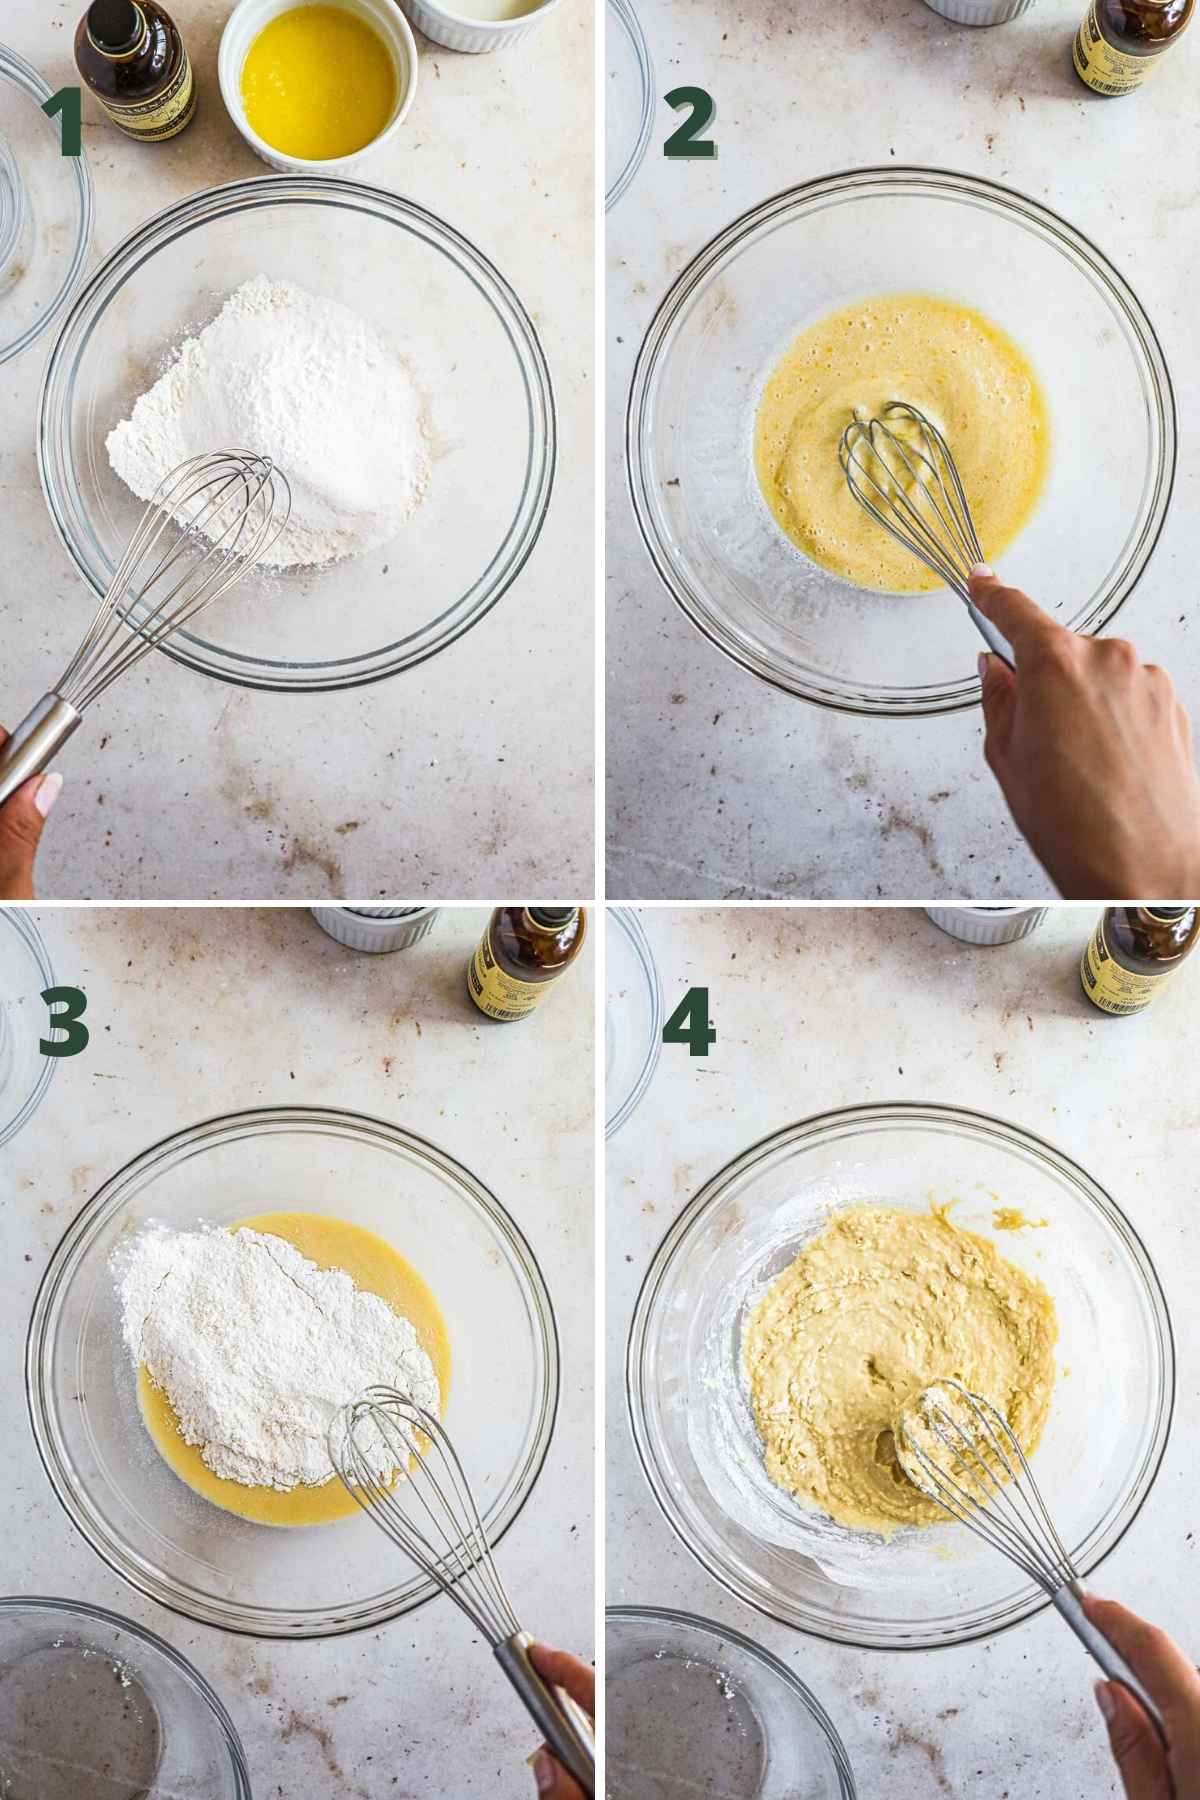 Steps to make fluffy oat milk pancakes, including mixing dry ingredients and wet ingredients, then combining the dry and wet ingredients.